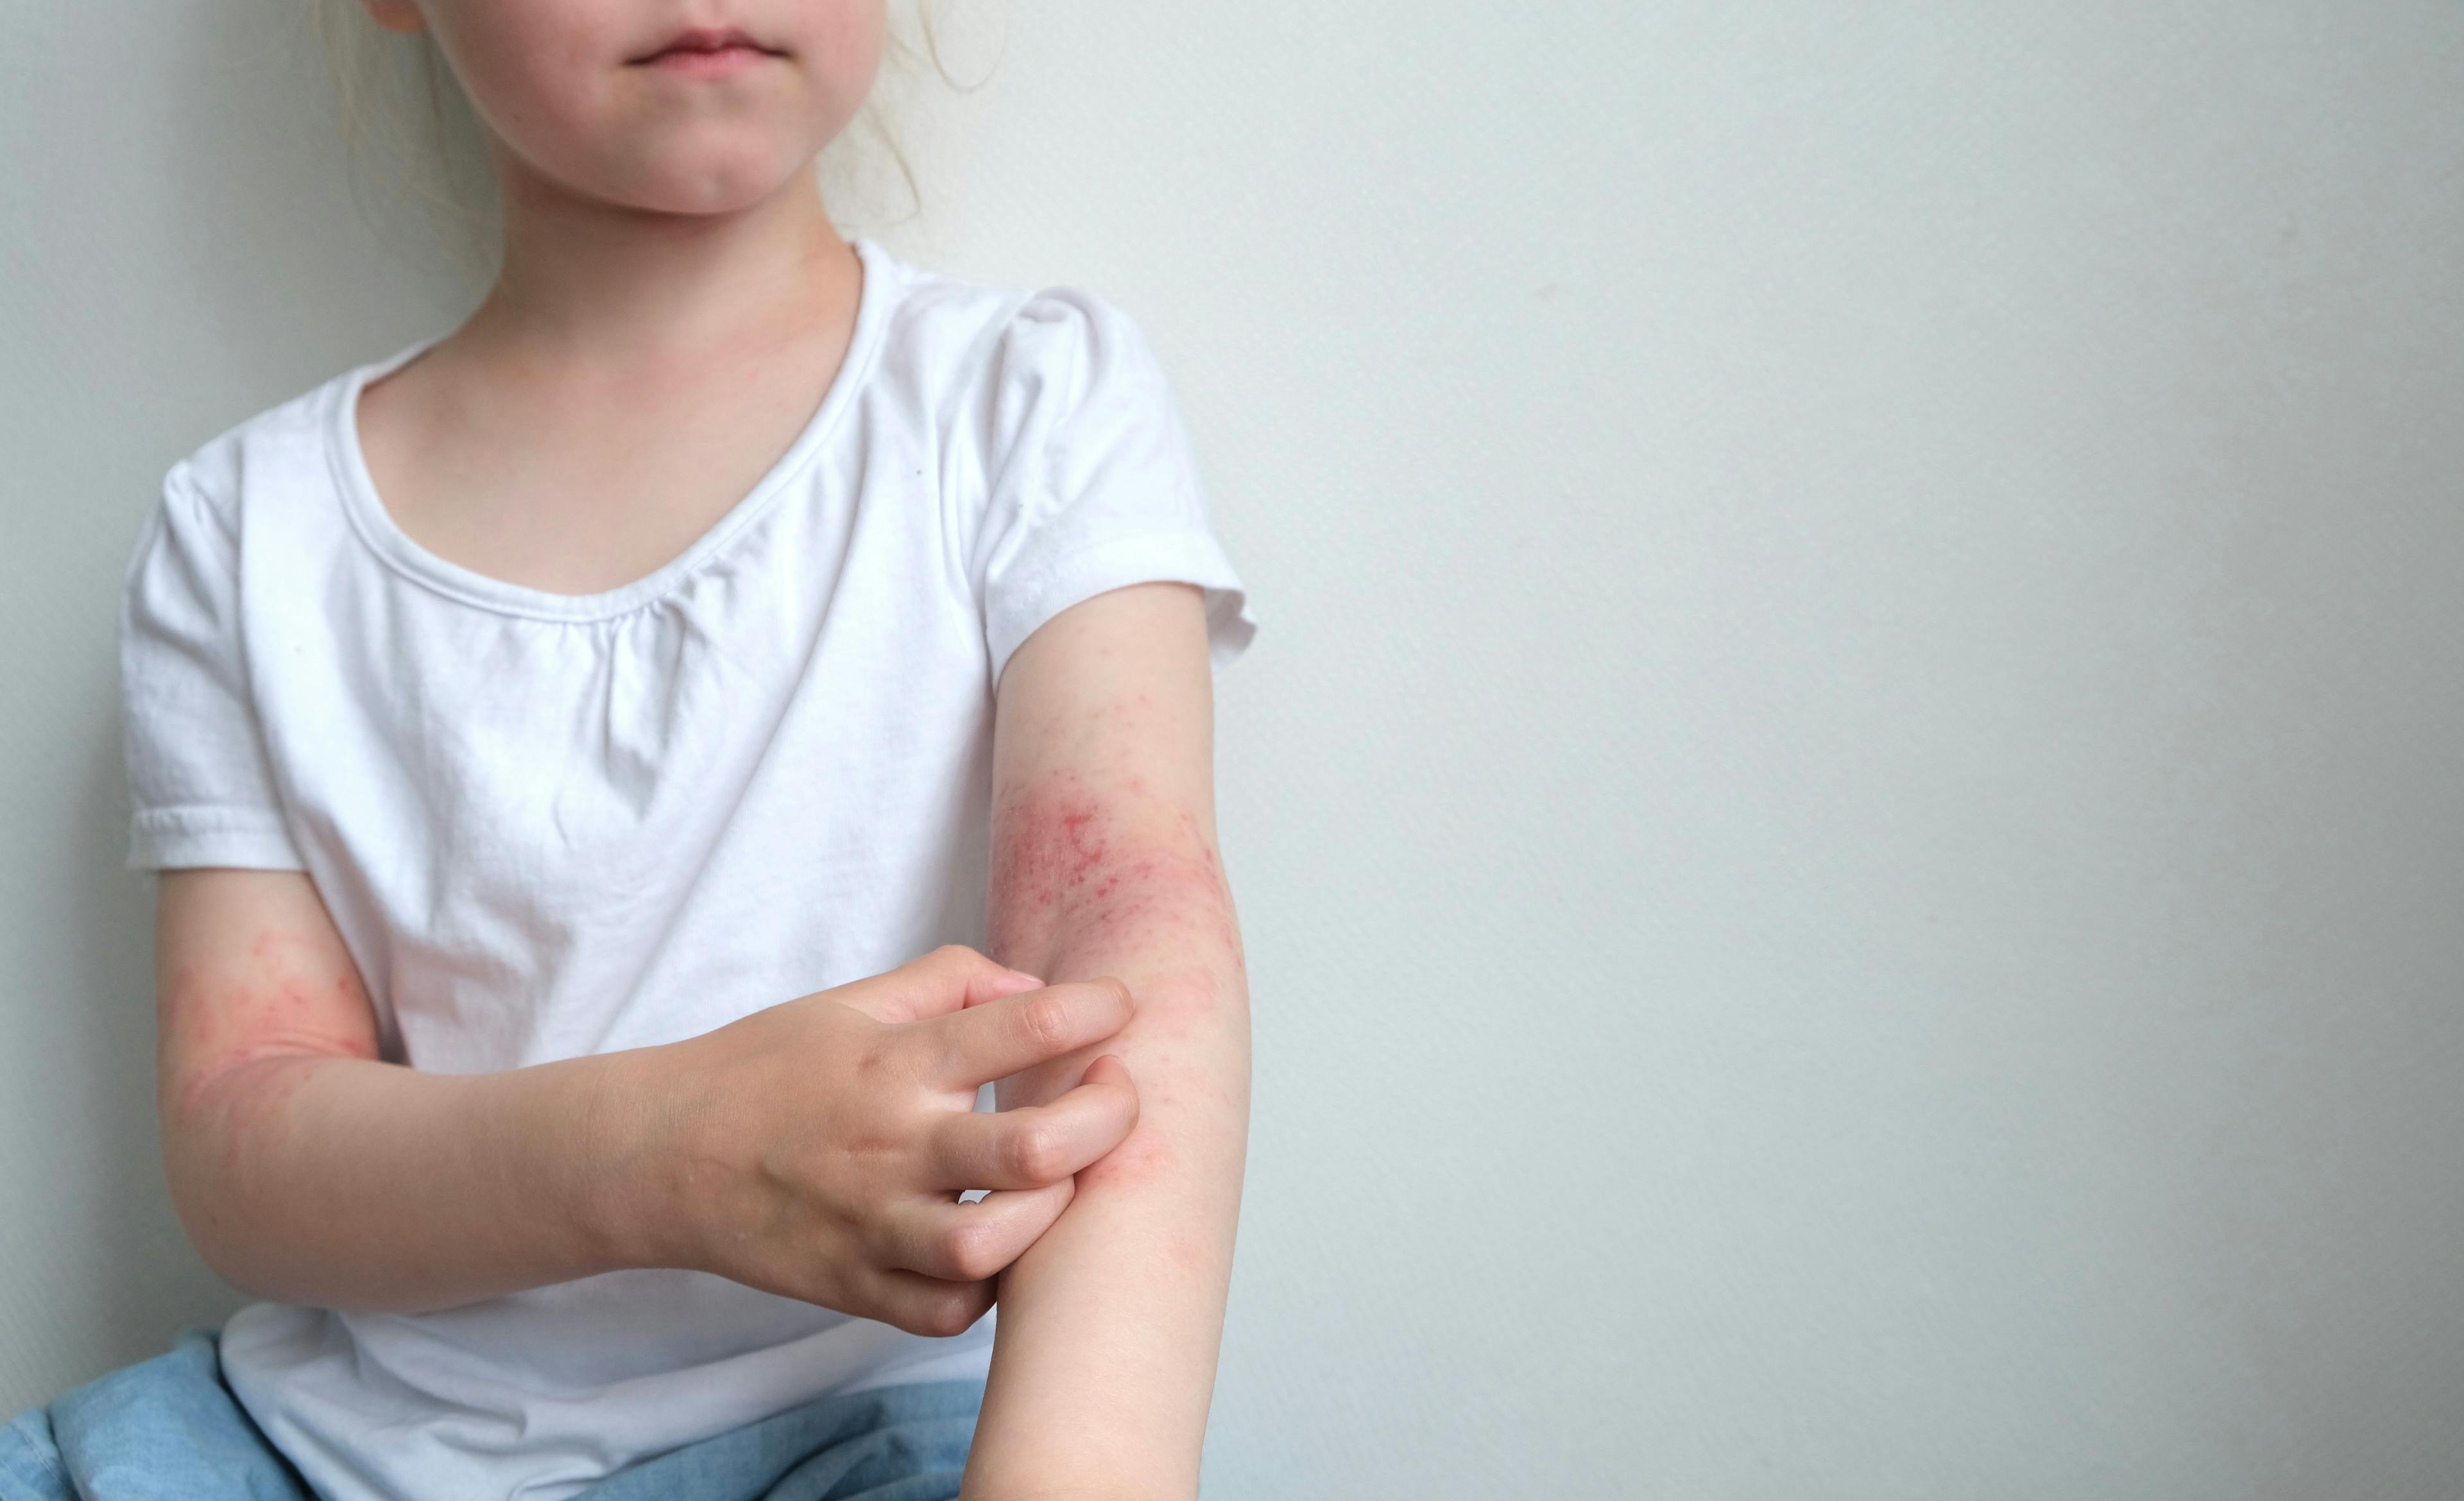 Can We Do More for Topical Therapy in Pediatric Atopic Dermatitis?